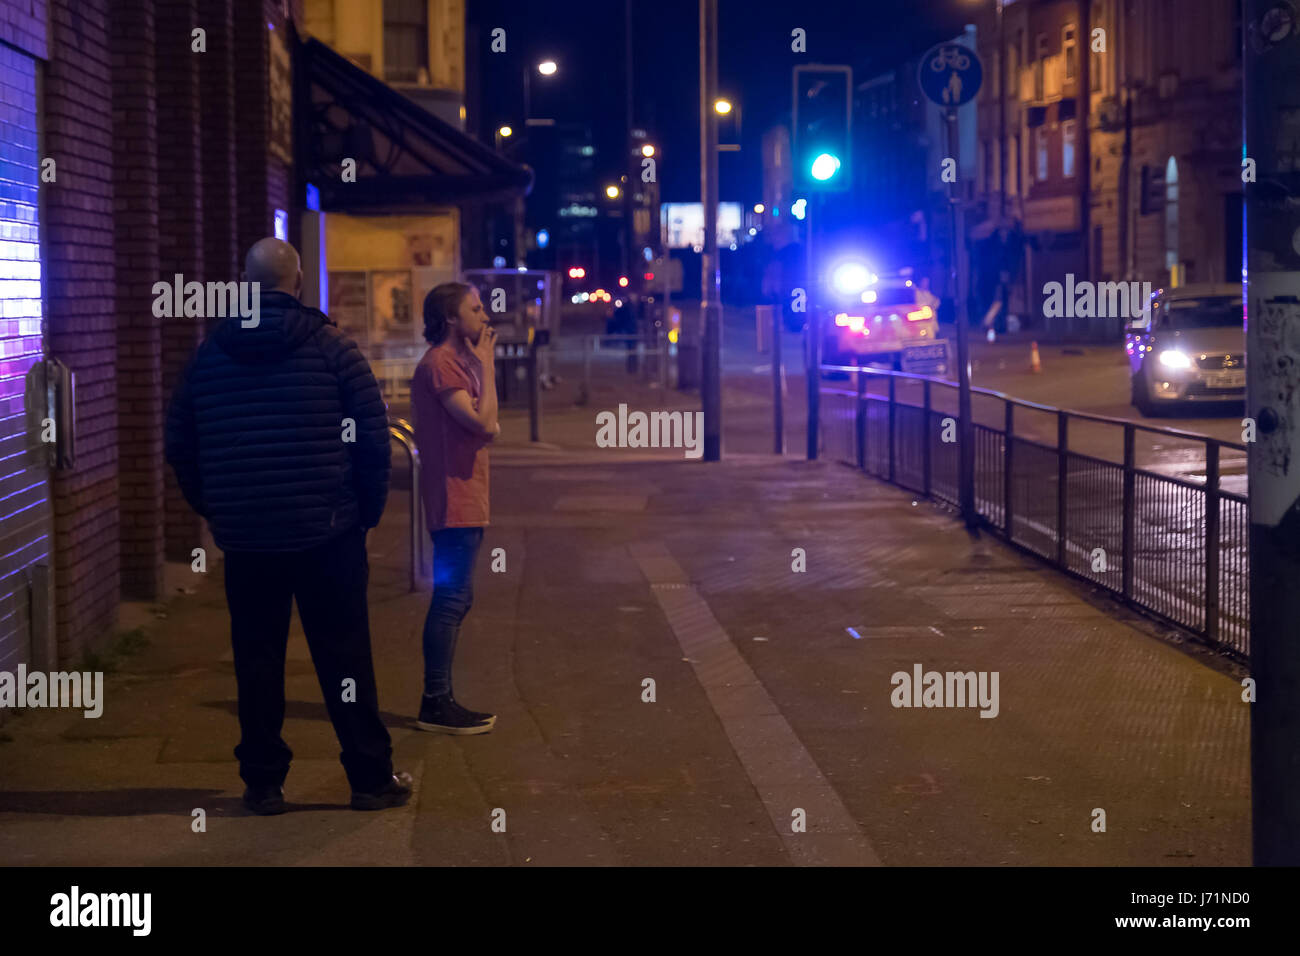 Manchester UK. Tuesday 23rd May 2017. Bystanders look on at police cordon on Ring Road junction Oldham Street. 22 people confirmed dead after explosion at an Ariana Grande concert at Manchester Arena. Copyright Credit: Ian Wray/Alamy Live News Stock Photo